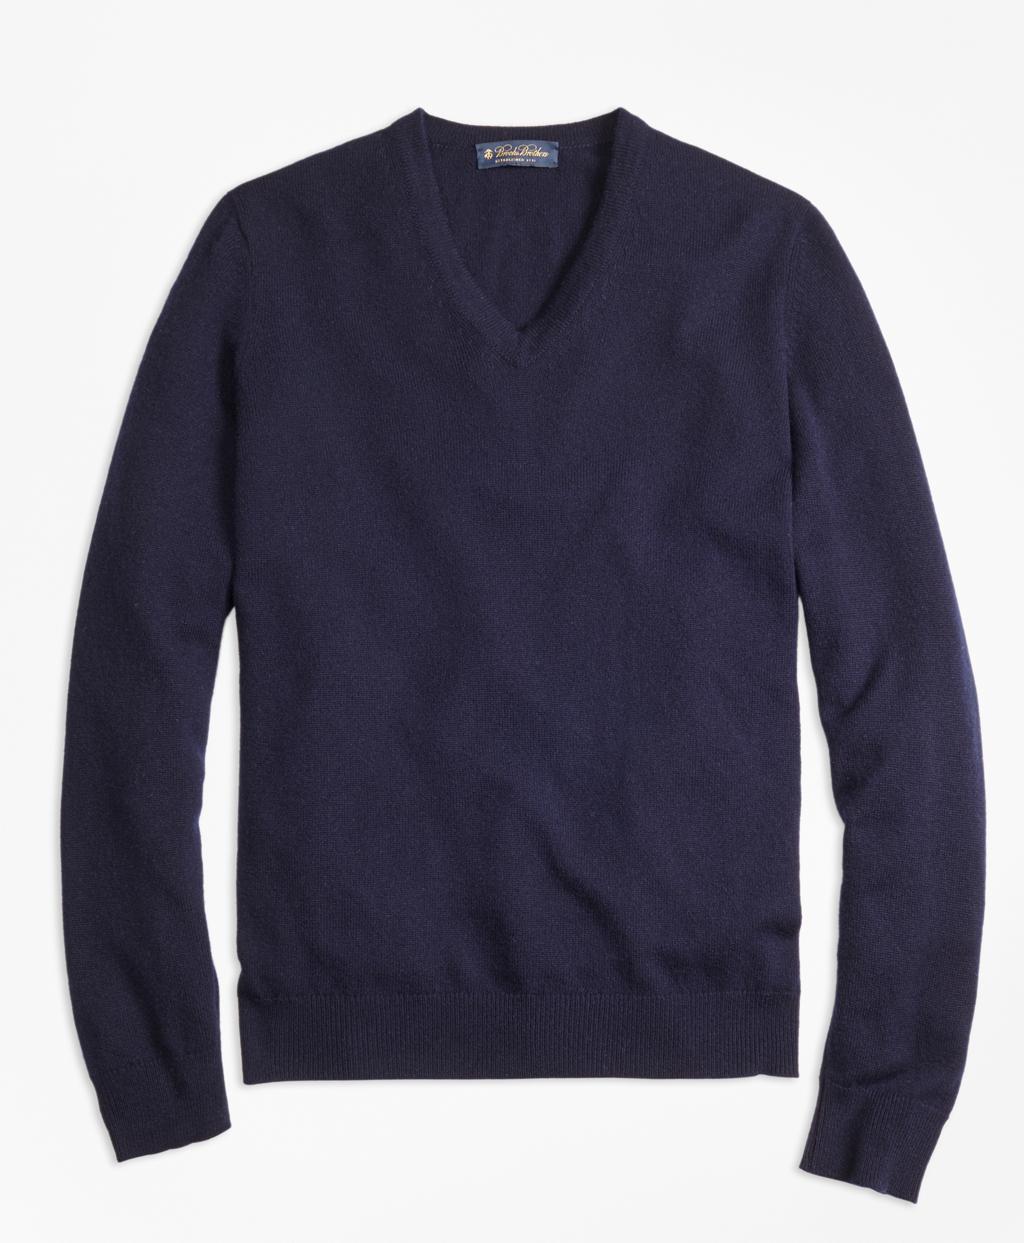 Lyst - Brooks Brothers Cashmere V-neck Sweater-basic Colors in Blue for ...